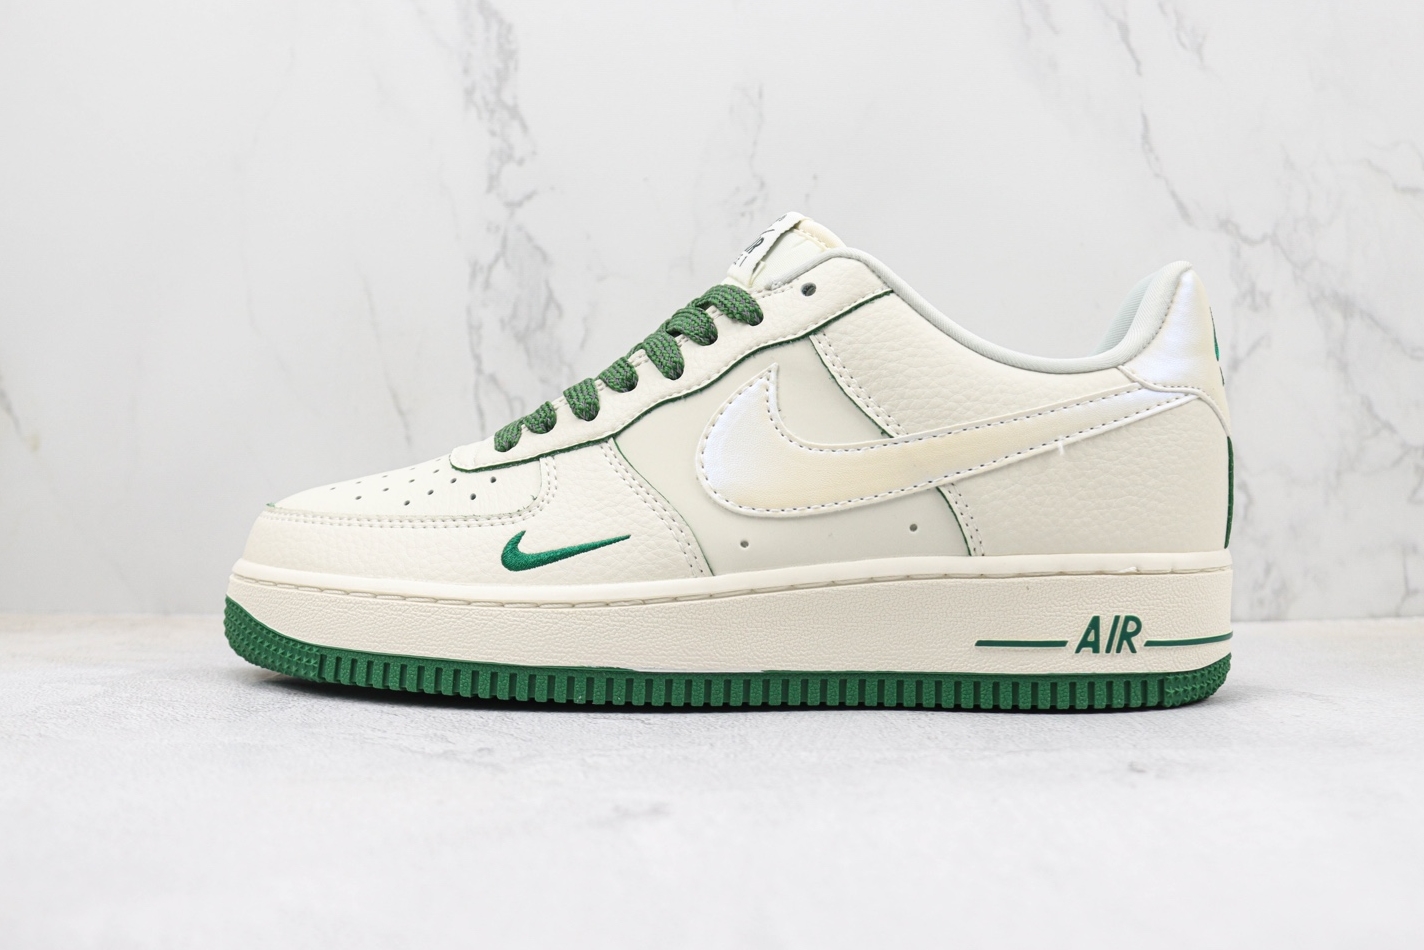 Nike Air Force 1 07 Low Pearlescent Beige Green DD9915-600 - Stylish and Trendy Sneakers for Any Occasion